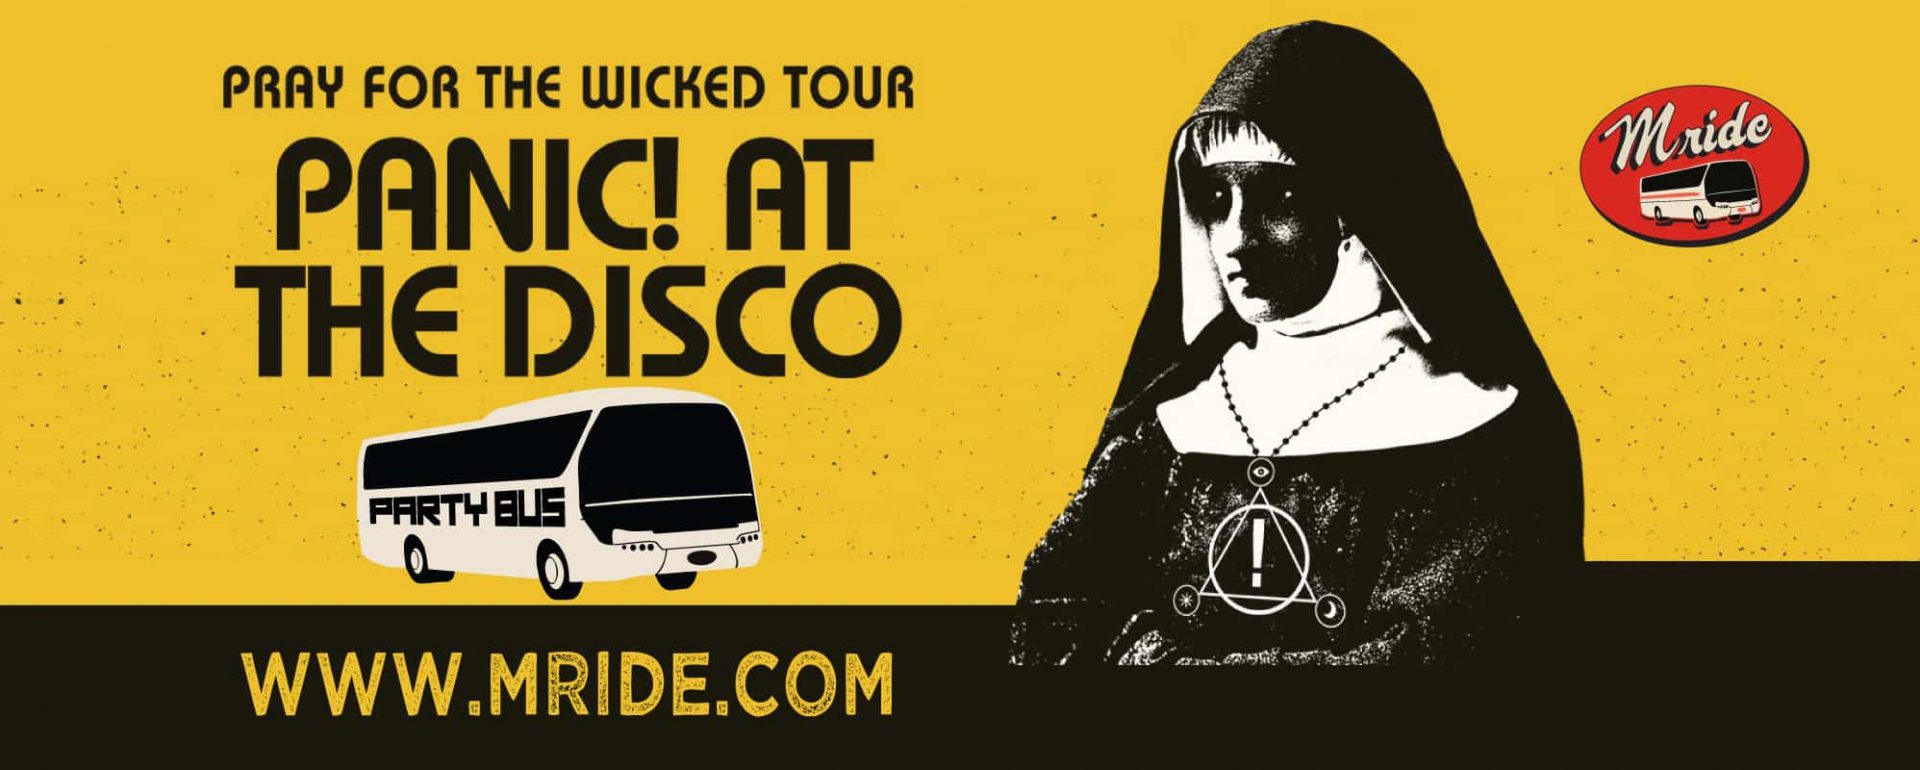 Panic at the Disco Pray for the Wicked Tour